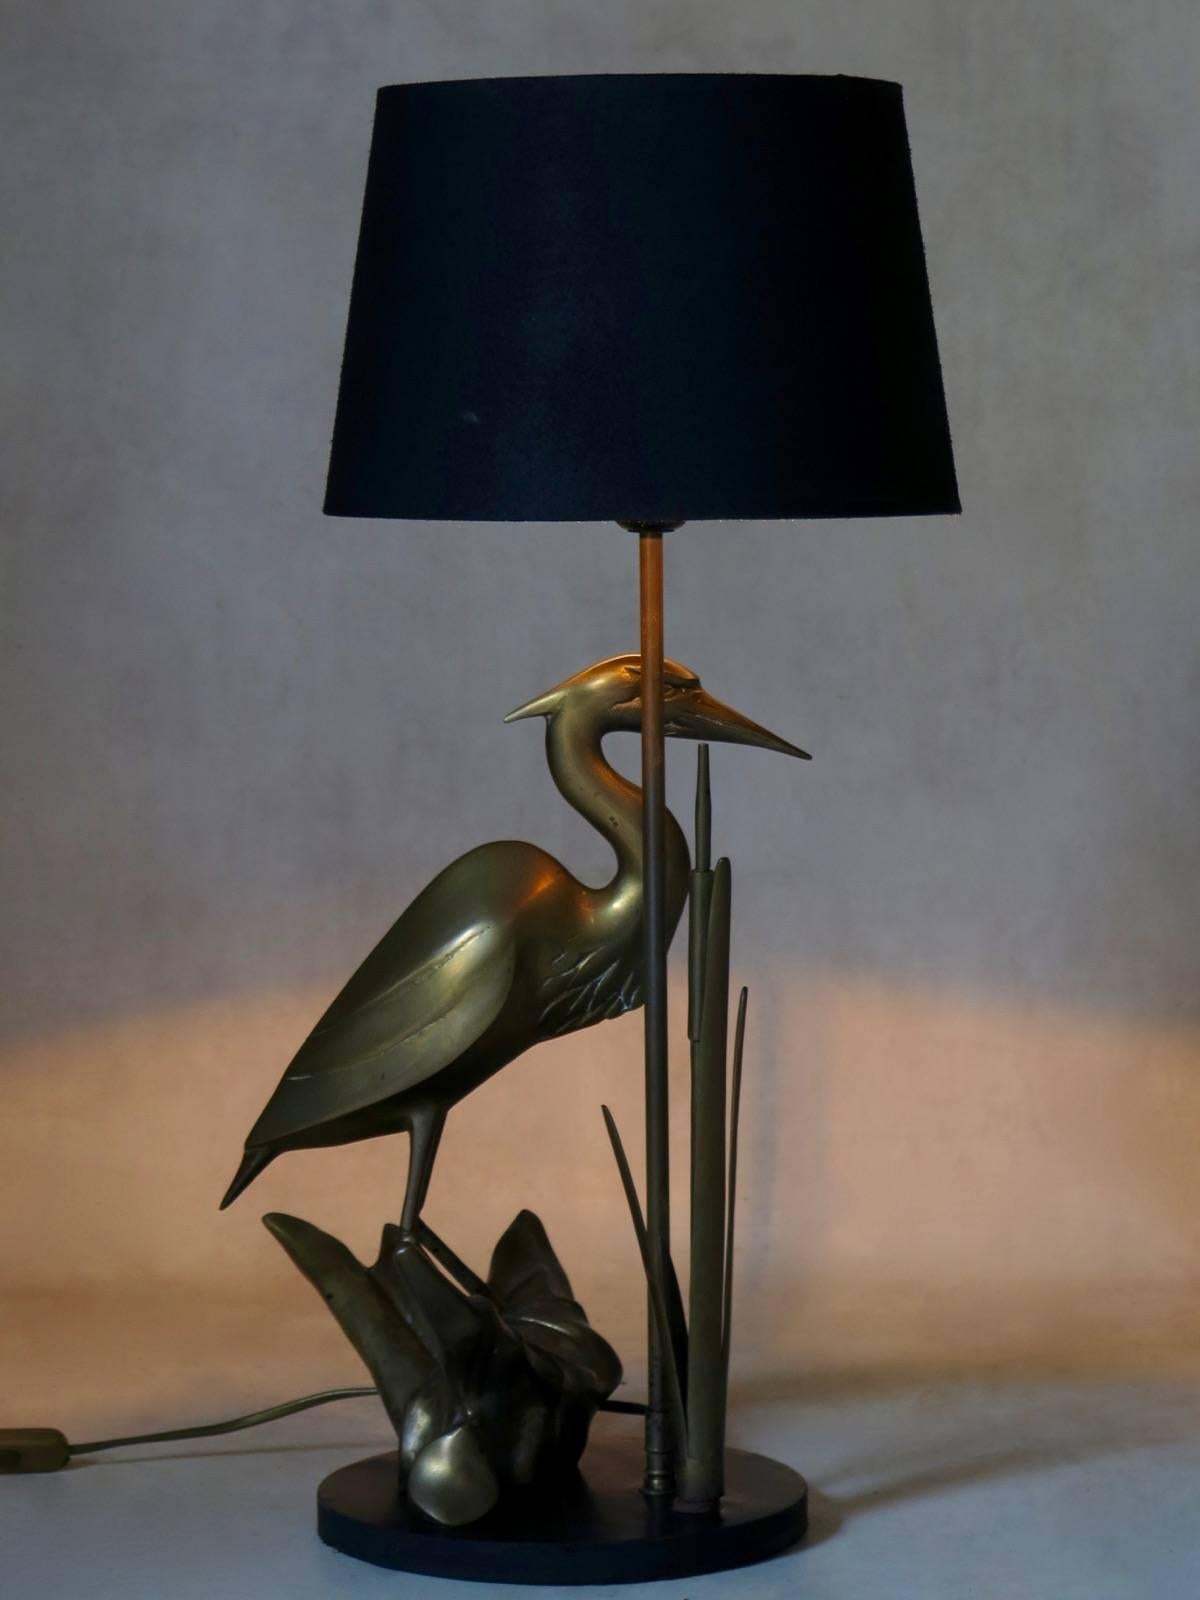 Brass table lamp representing a heron amongst bullrushes. Set on a black-painted round wooden base.